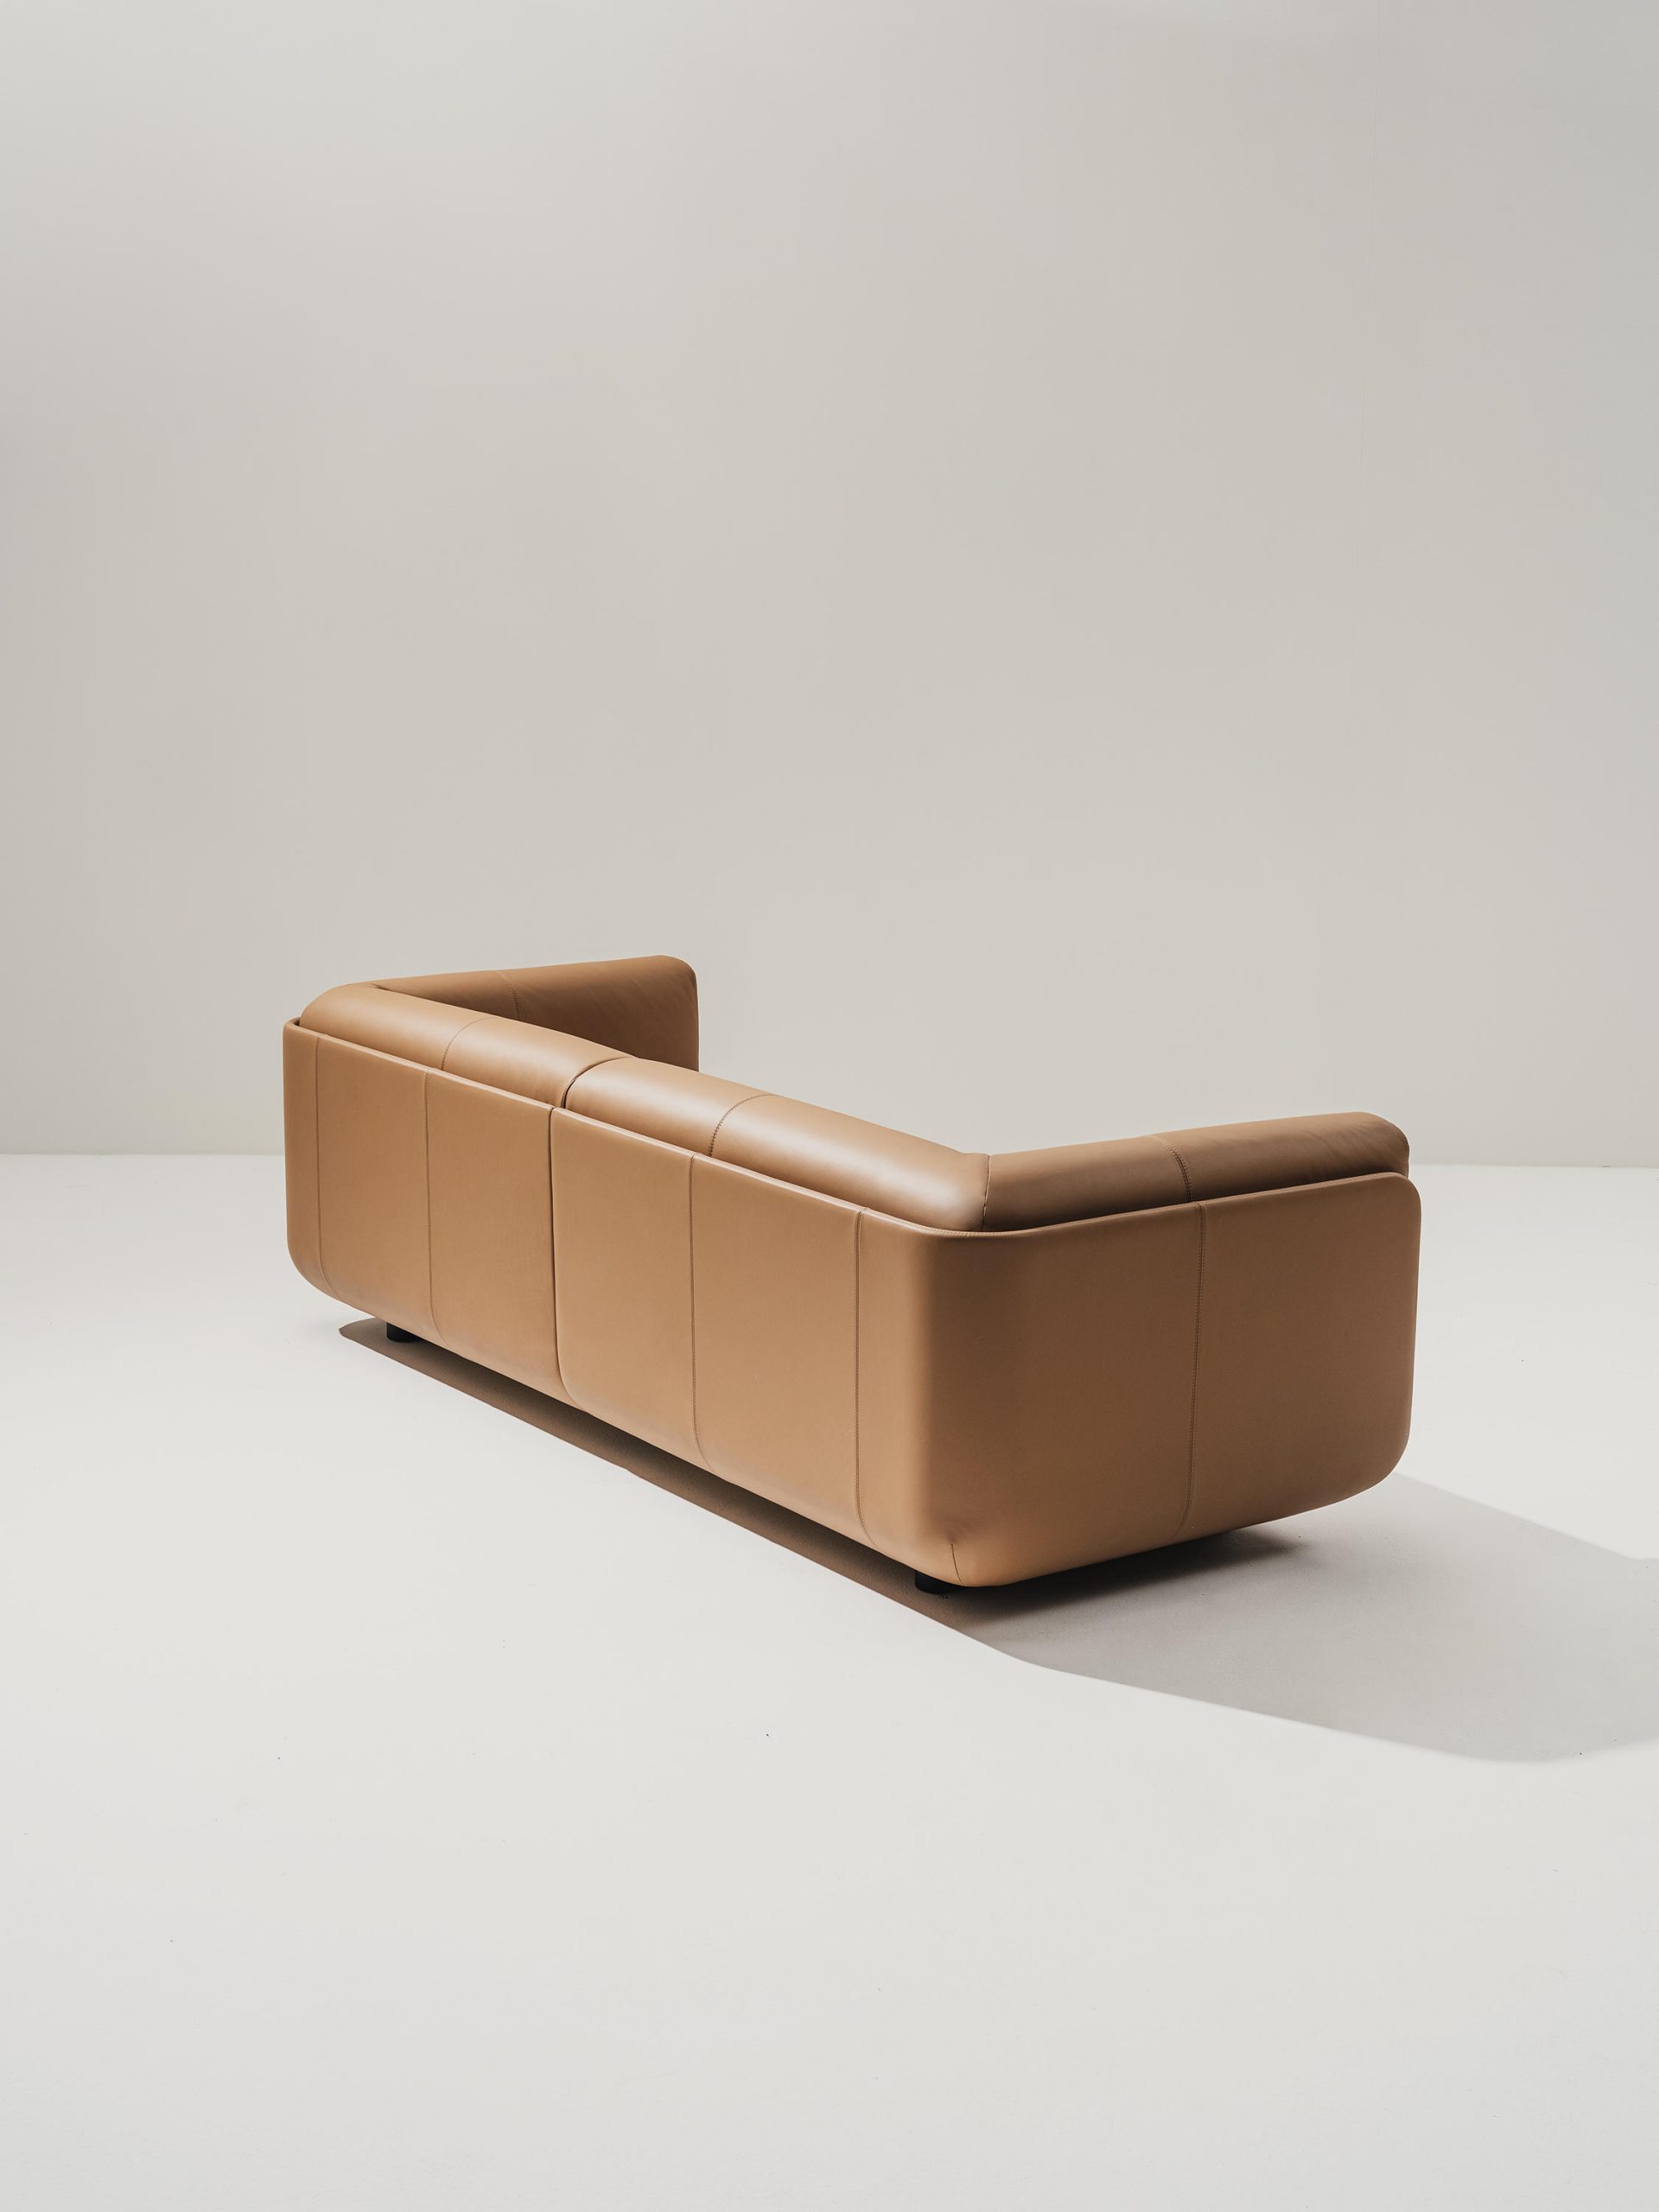 Shaal Sofa by Doshi Levien for Arper